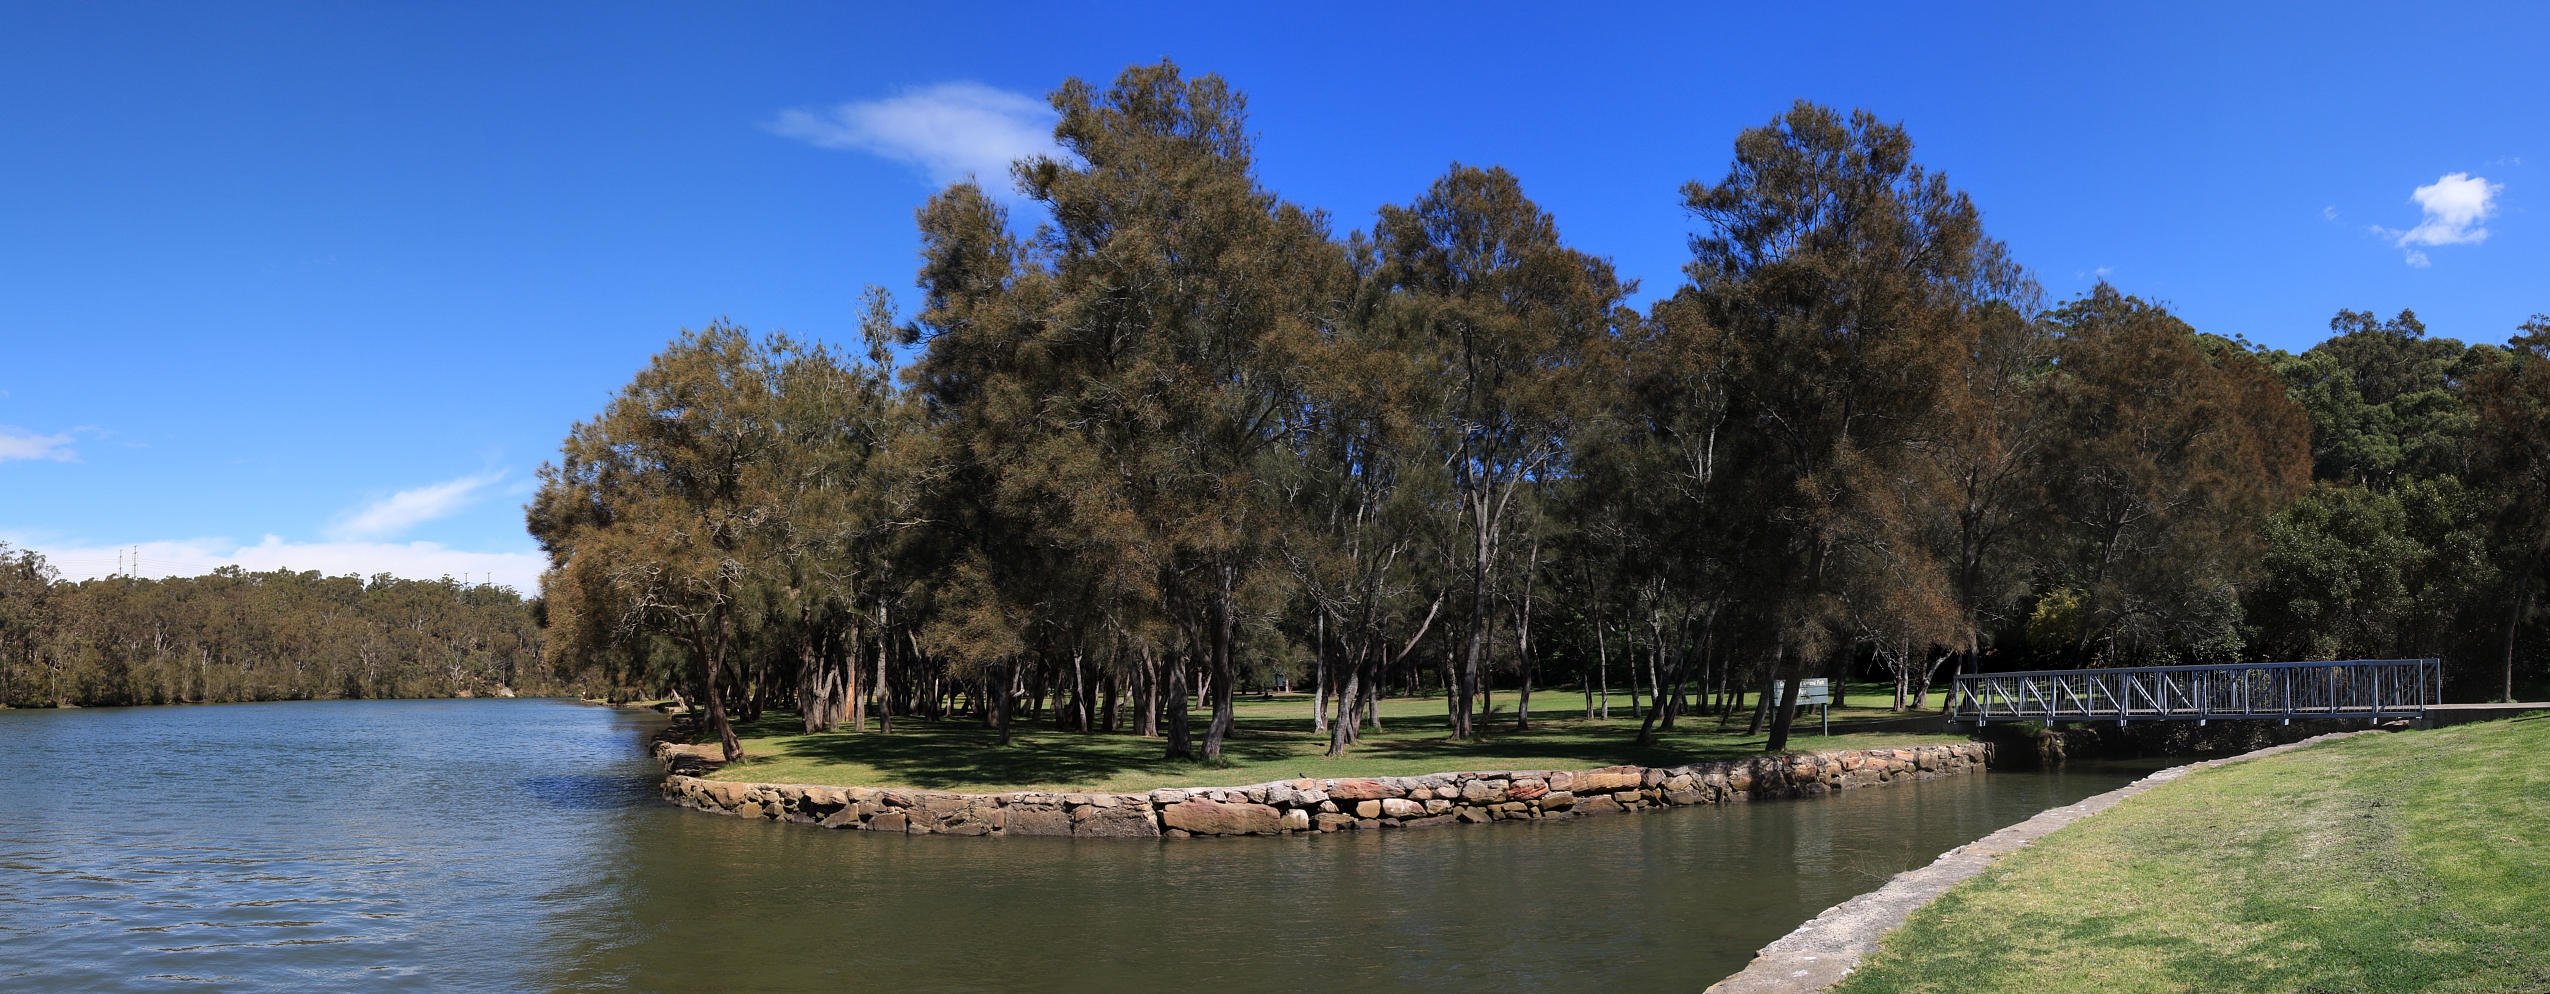 File:Georges river picnic point.jpg - Wikimedia Commons